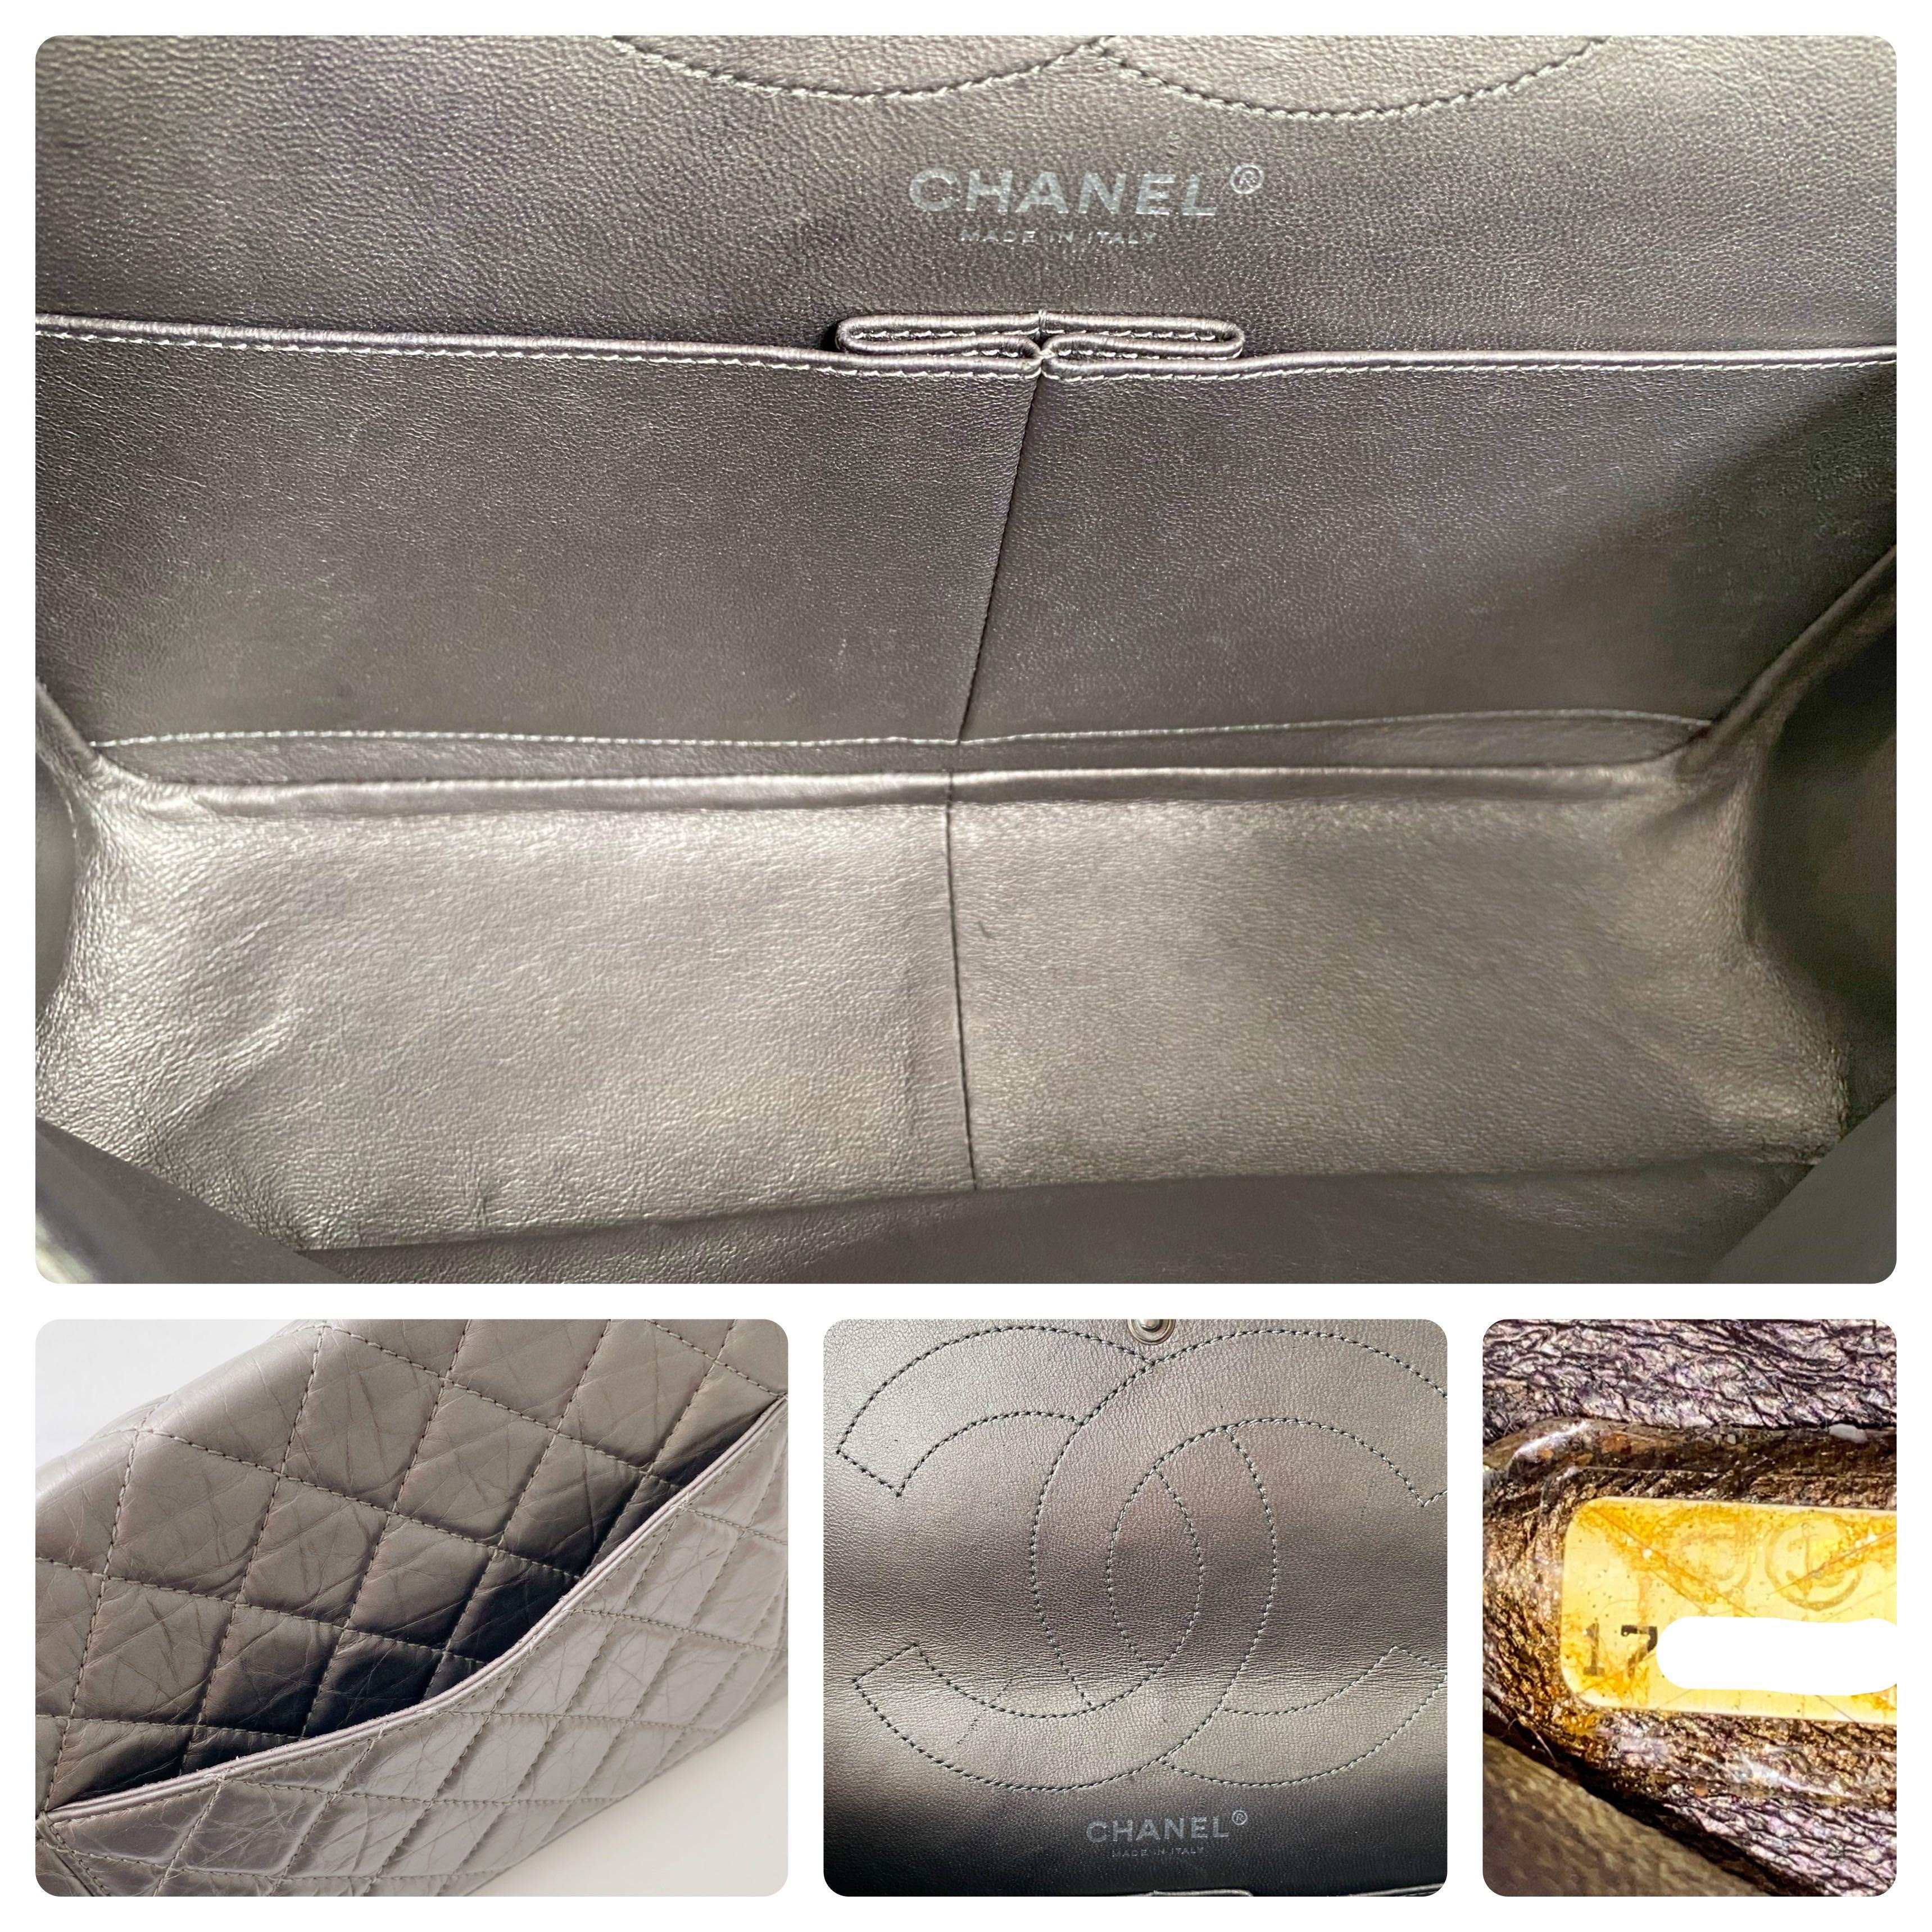 Chanel Silver Quilted Leather Reissue 2.55 Classic 227 Flap Bag